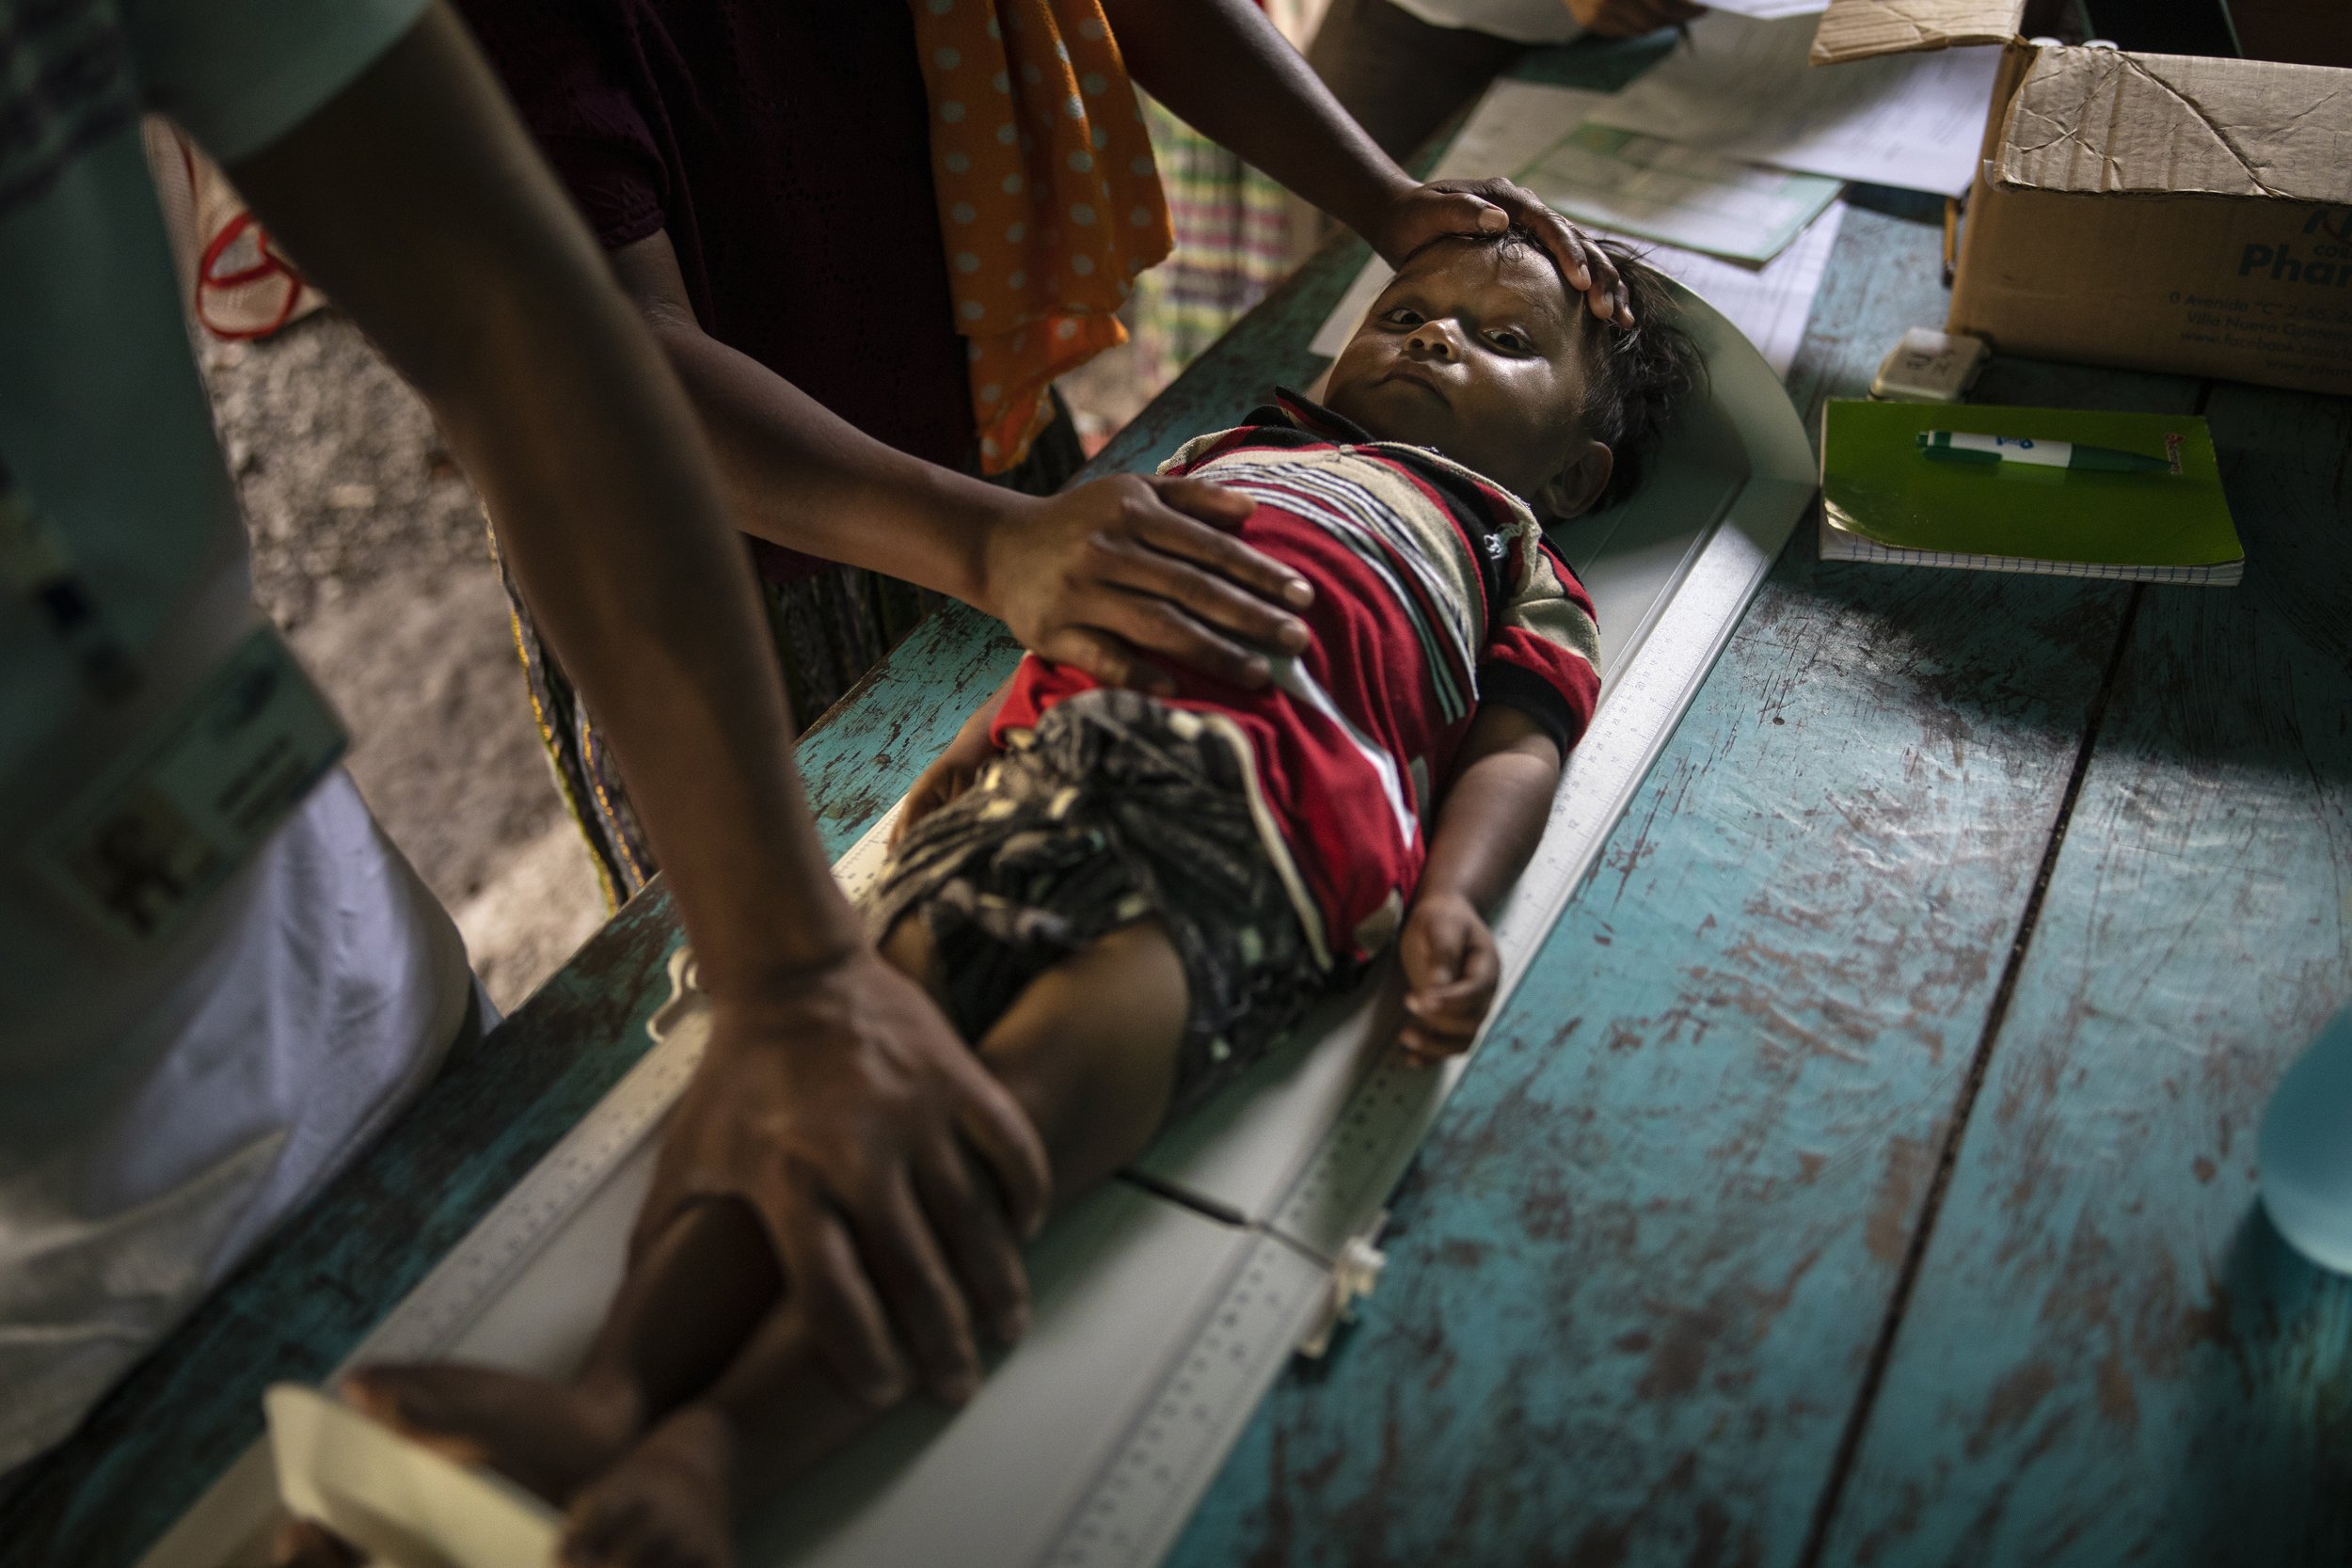  Sergio David Jom, 2, lies on a scale as he is measured during a wellness checkup in the makeshift settlement Nuevo Queja, Guatemala, on July 9, 2021. (AP Photo/Rodrigo Abd) 